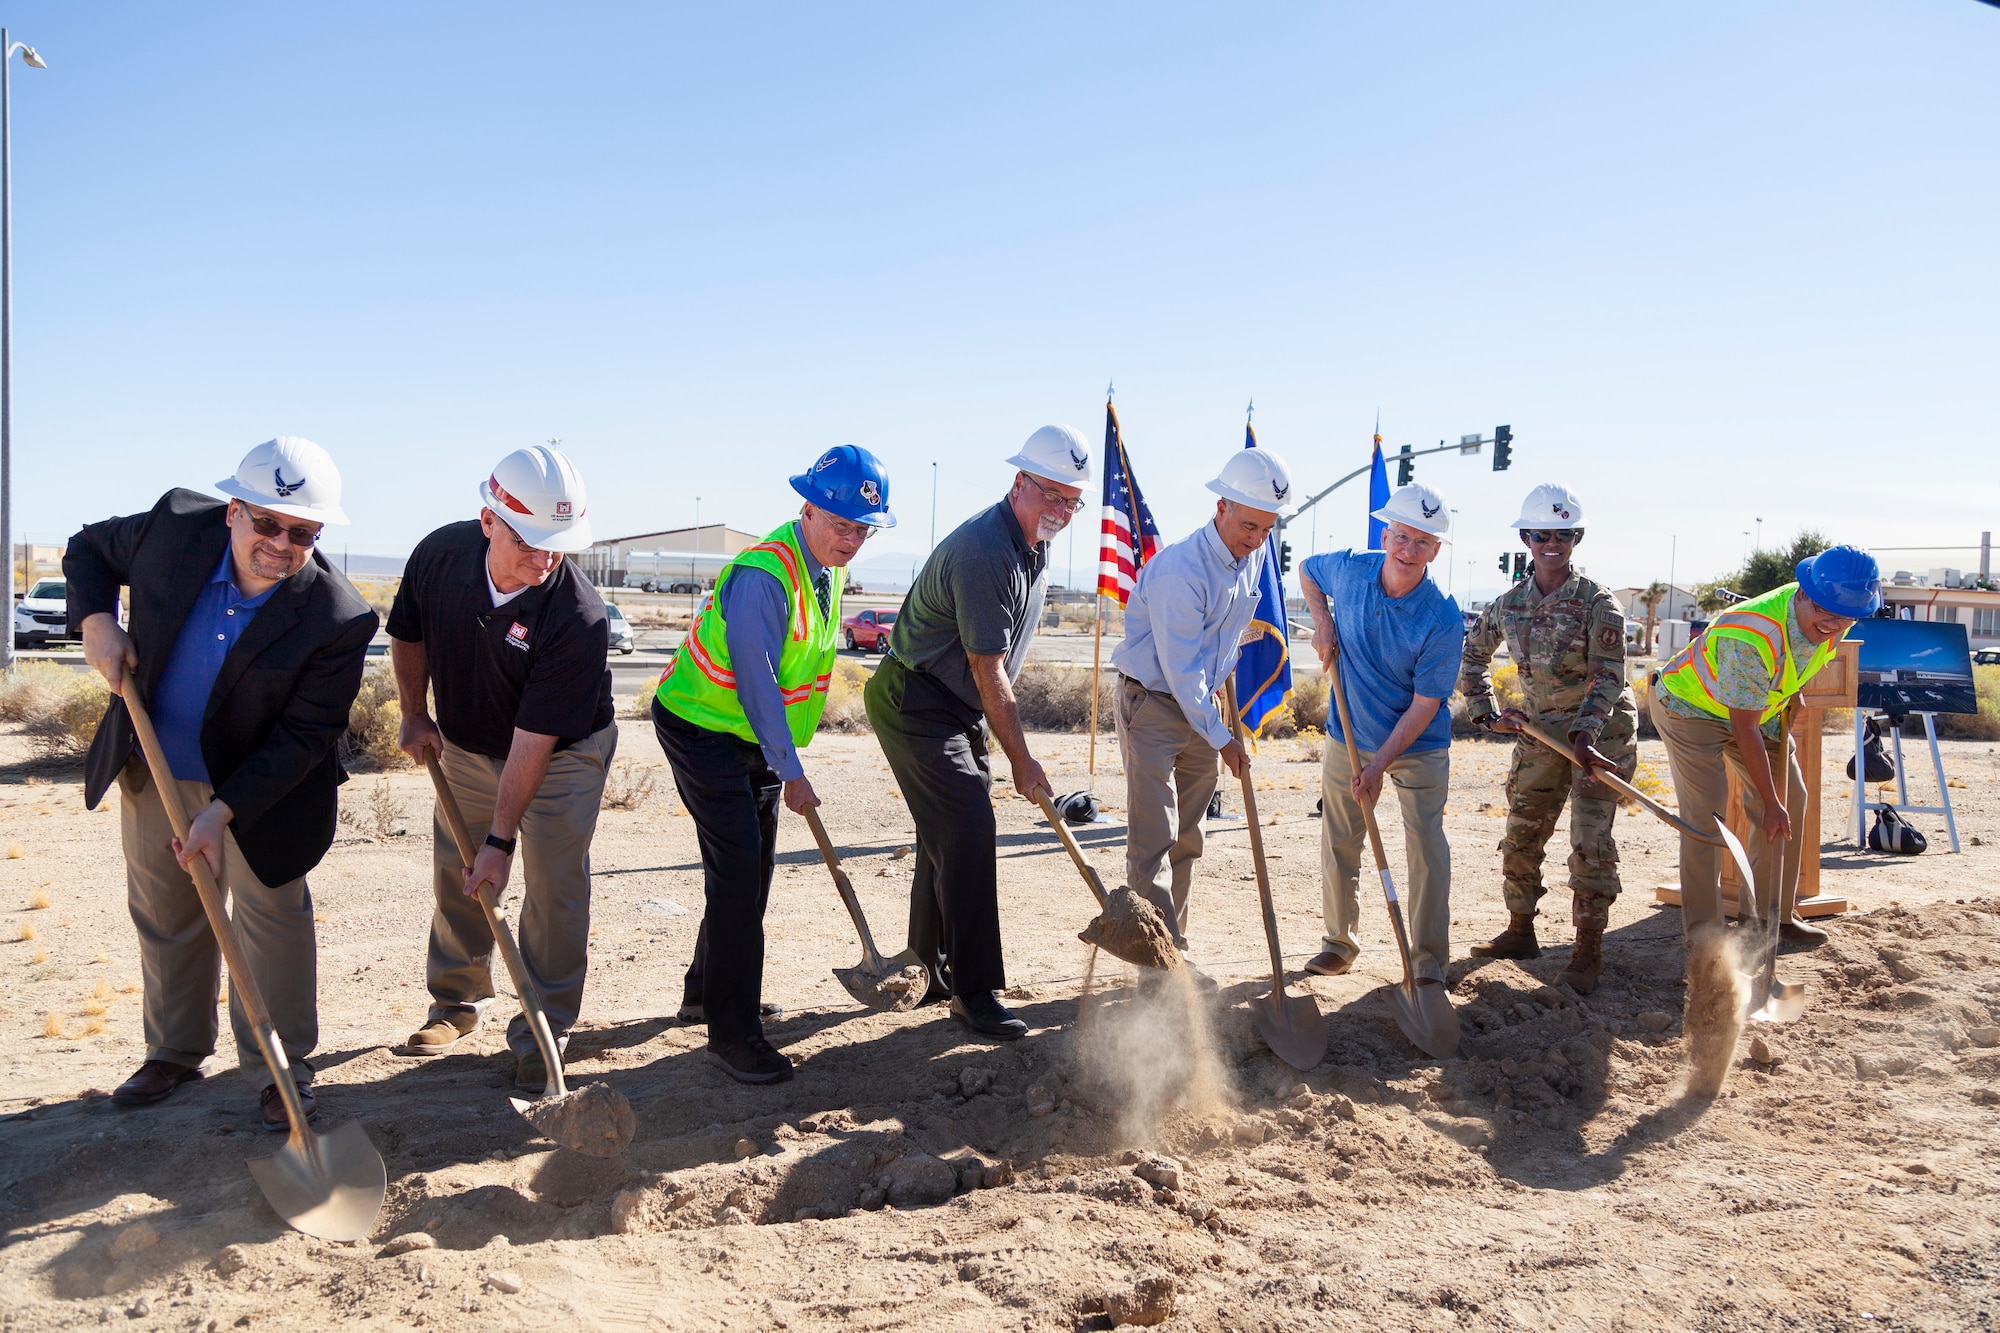 The $40 million, state-of-the-art, energy efficient building will provide a modern facility with lab capabilities to support and develop new methodologies and equipment critical for testing cutting edge weapons systems.